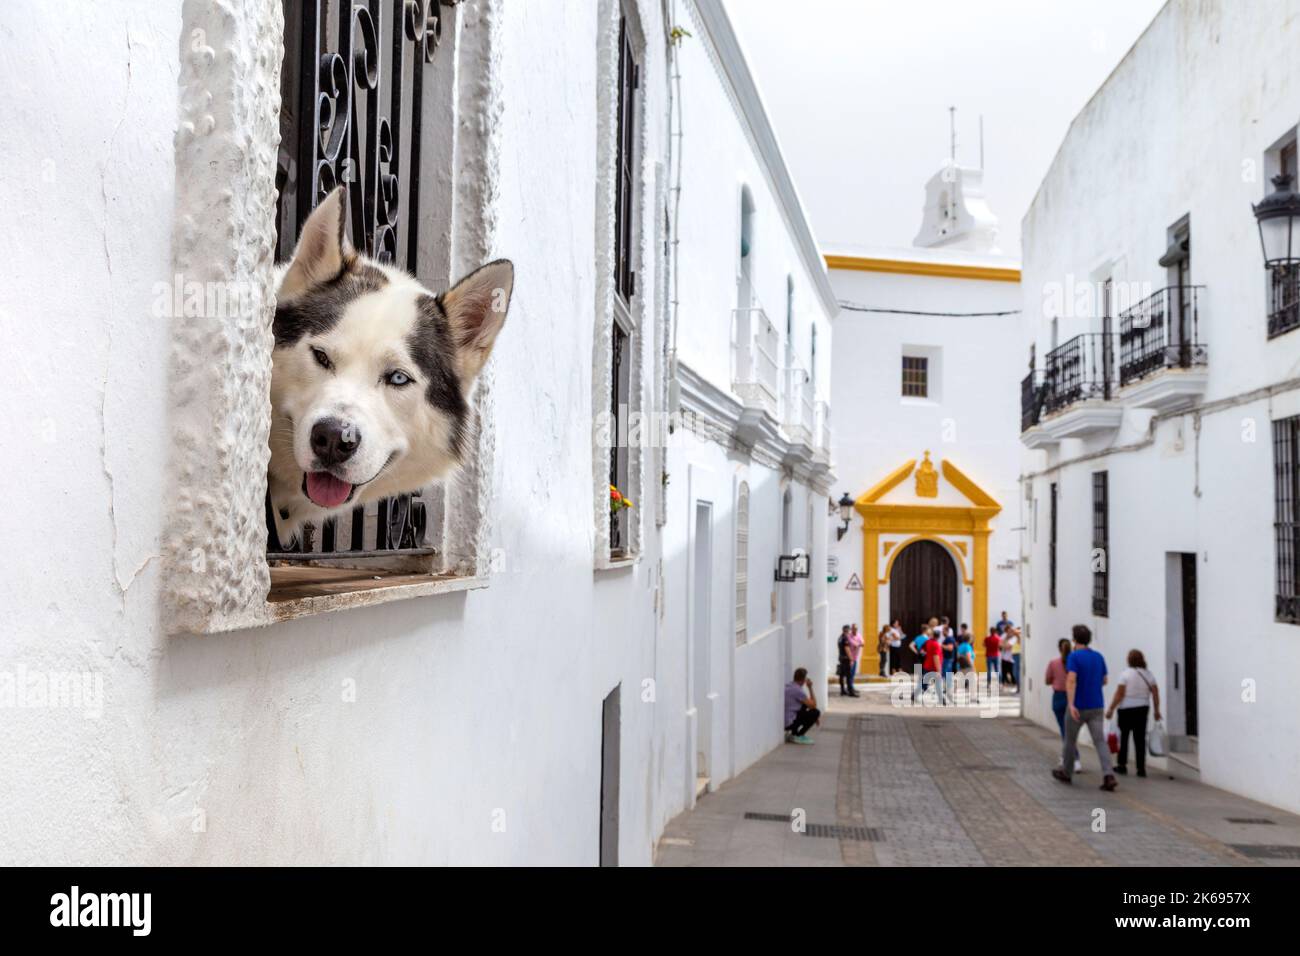 Husky dog looking out of a window, Vejer de la Frontera, Andalusia, Spain Stock Photo